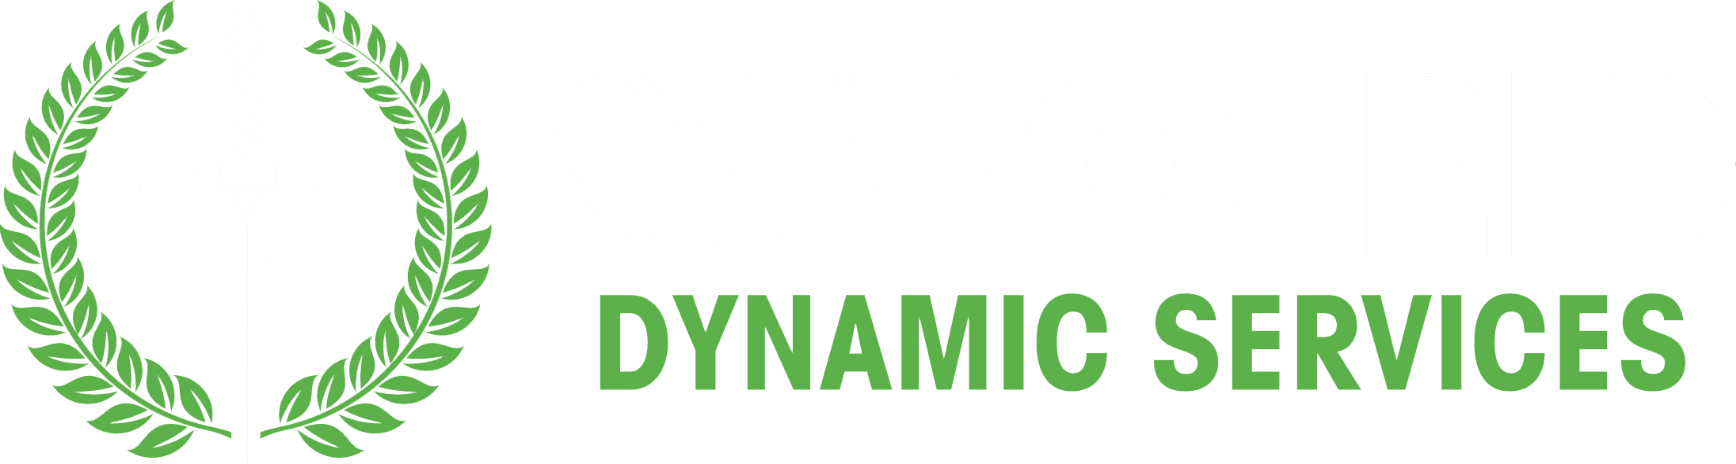 Sword Dynamic Services